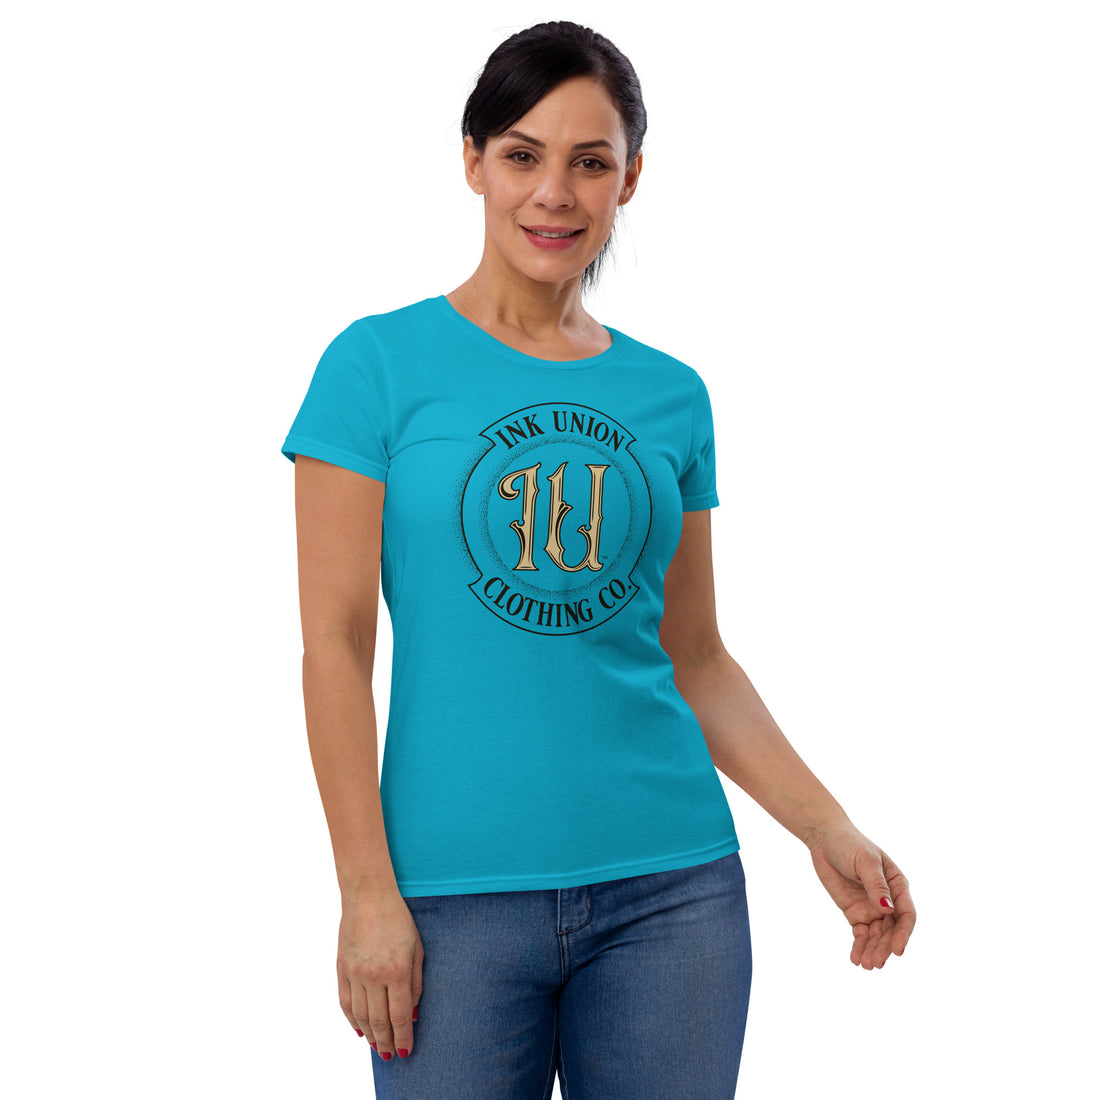 An attractive woman is wearing a light blue t-shirt with the Ink Union Clothing Co Badge logo in black and gold.